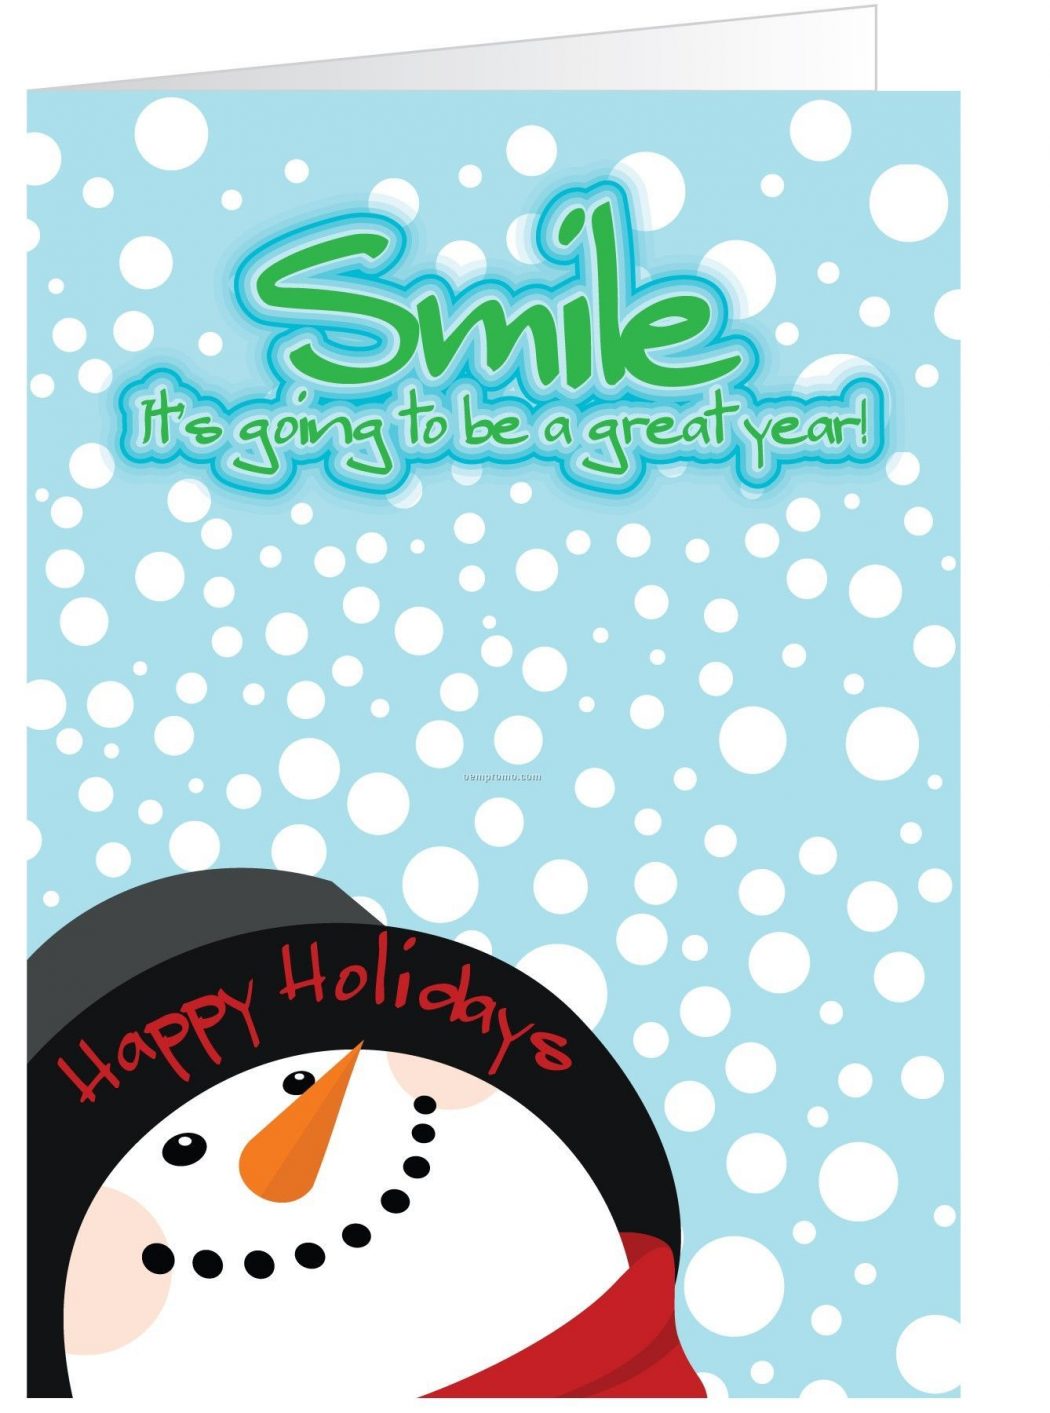 Snowman-Smile-Holiday-Greeting Wonderful greeting cards for happy holidays